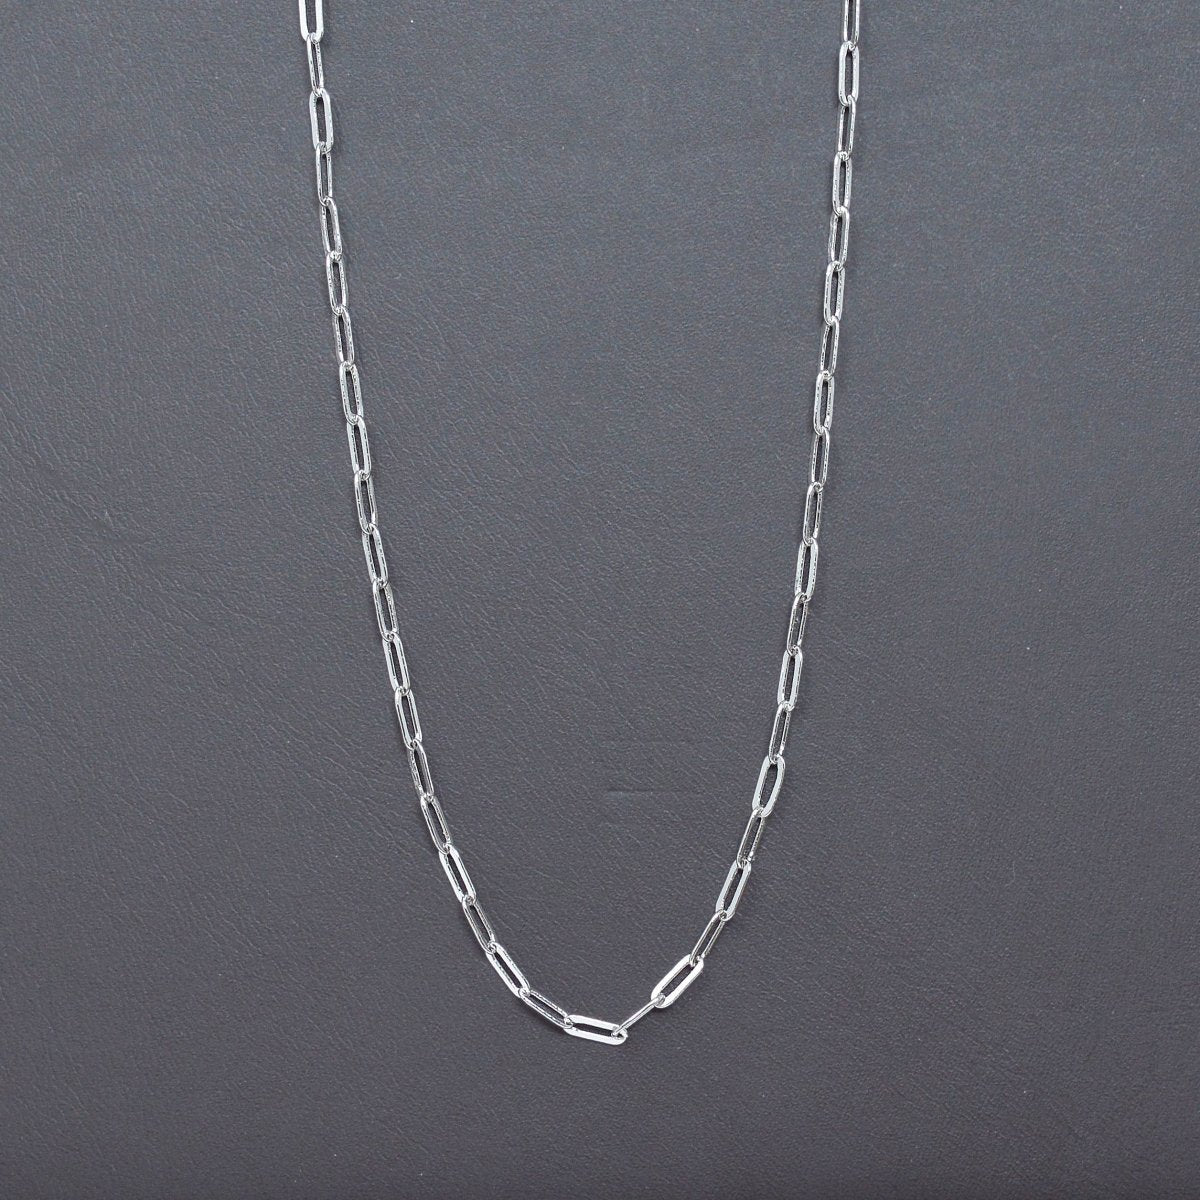 Silver PaperClip Chain Necklace Dainty Thin Oval Link Chain 18 inch Necklace Silver Jewelry for Layer Necklace | CN-1009 Clearance Pricing - DLUXCA